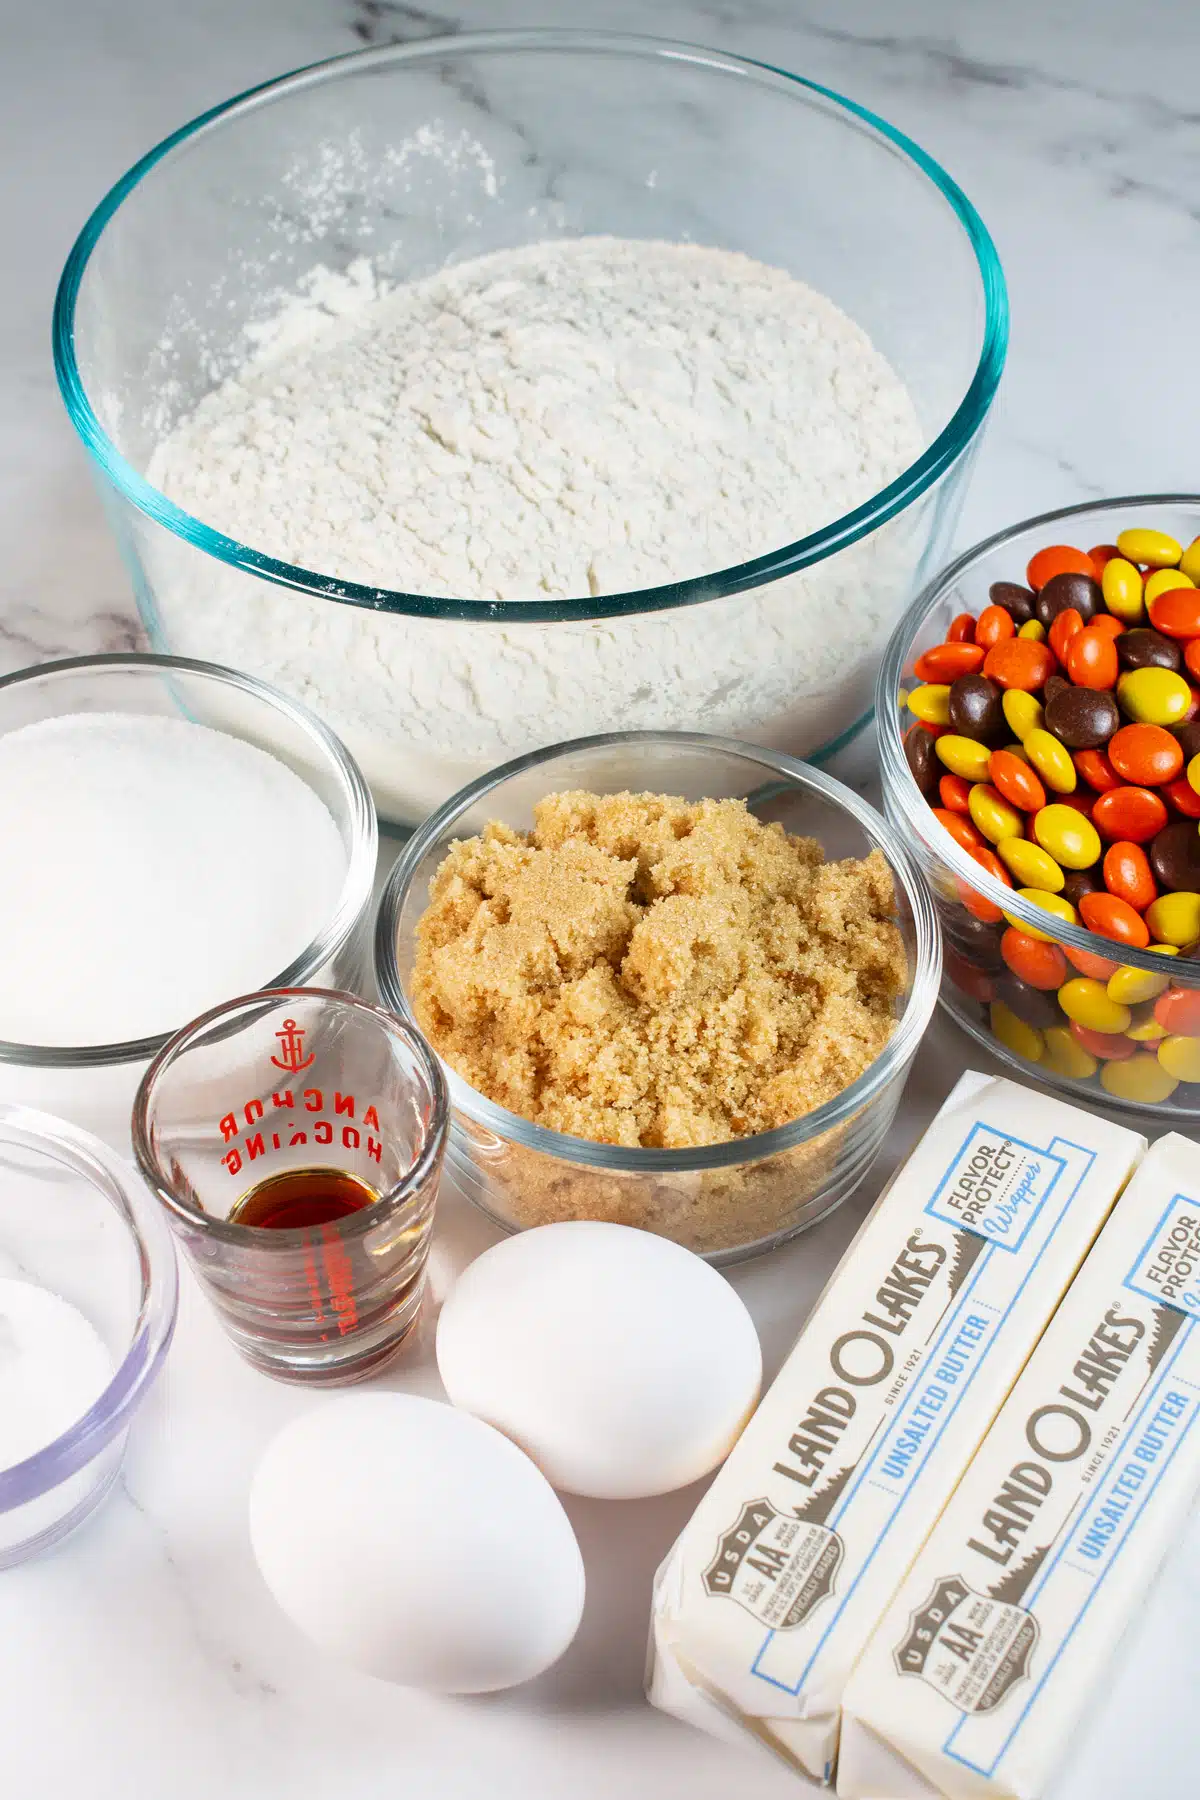 Ingredients needed for Reese's pieces cookies.